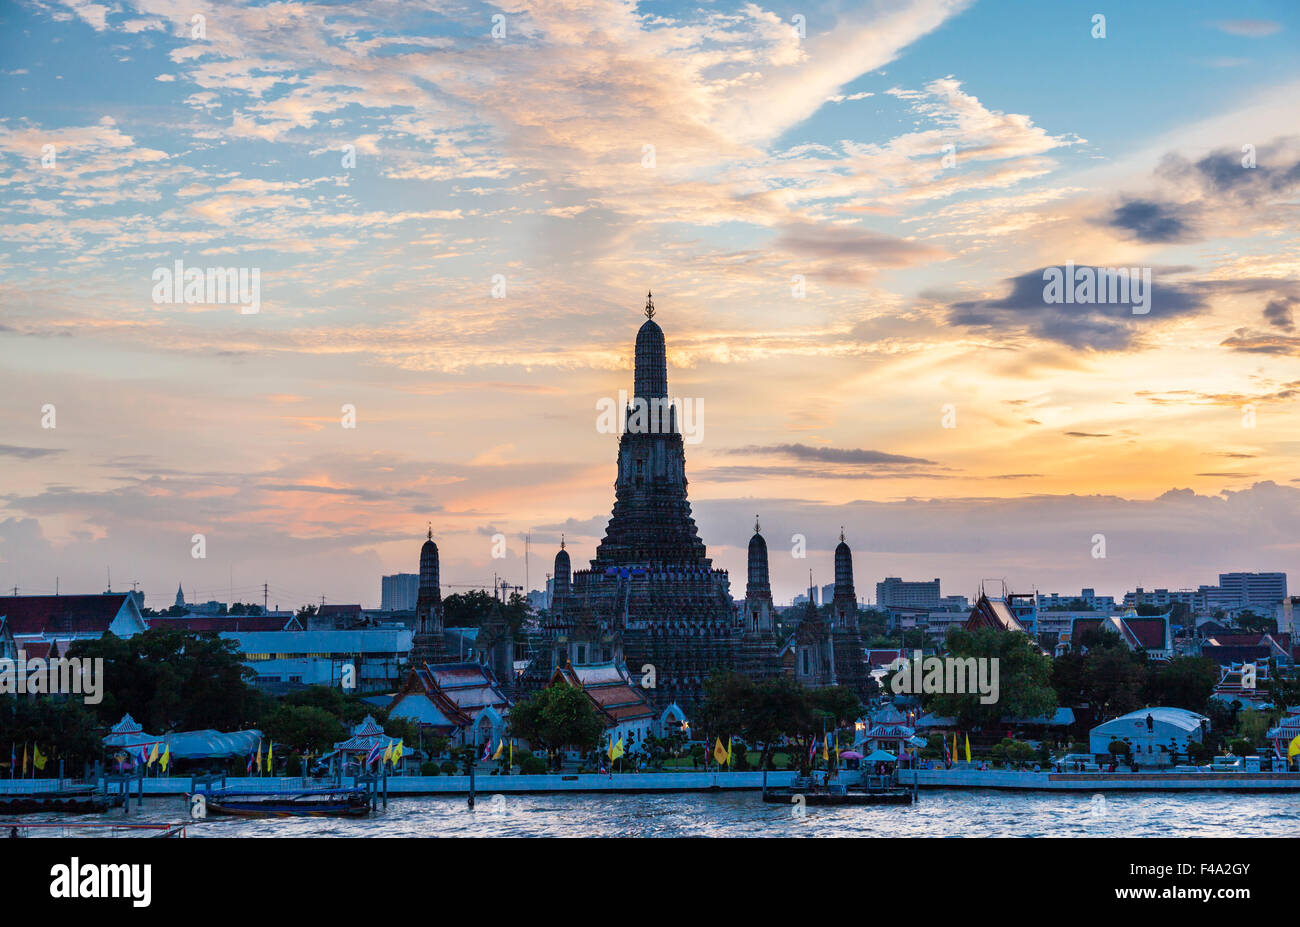 Thailand, evening mood over Bangkok Yai and the Chao Phraya River, with the mighty central prang of Wat Arun, Temple of Dawn, si Stock Photo